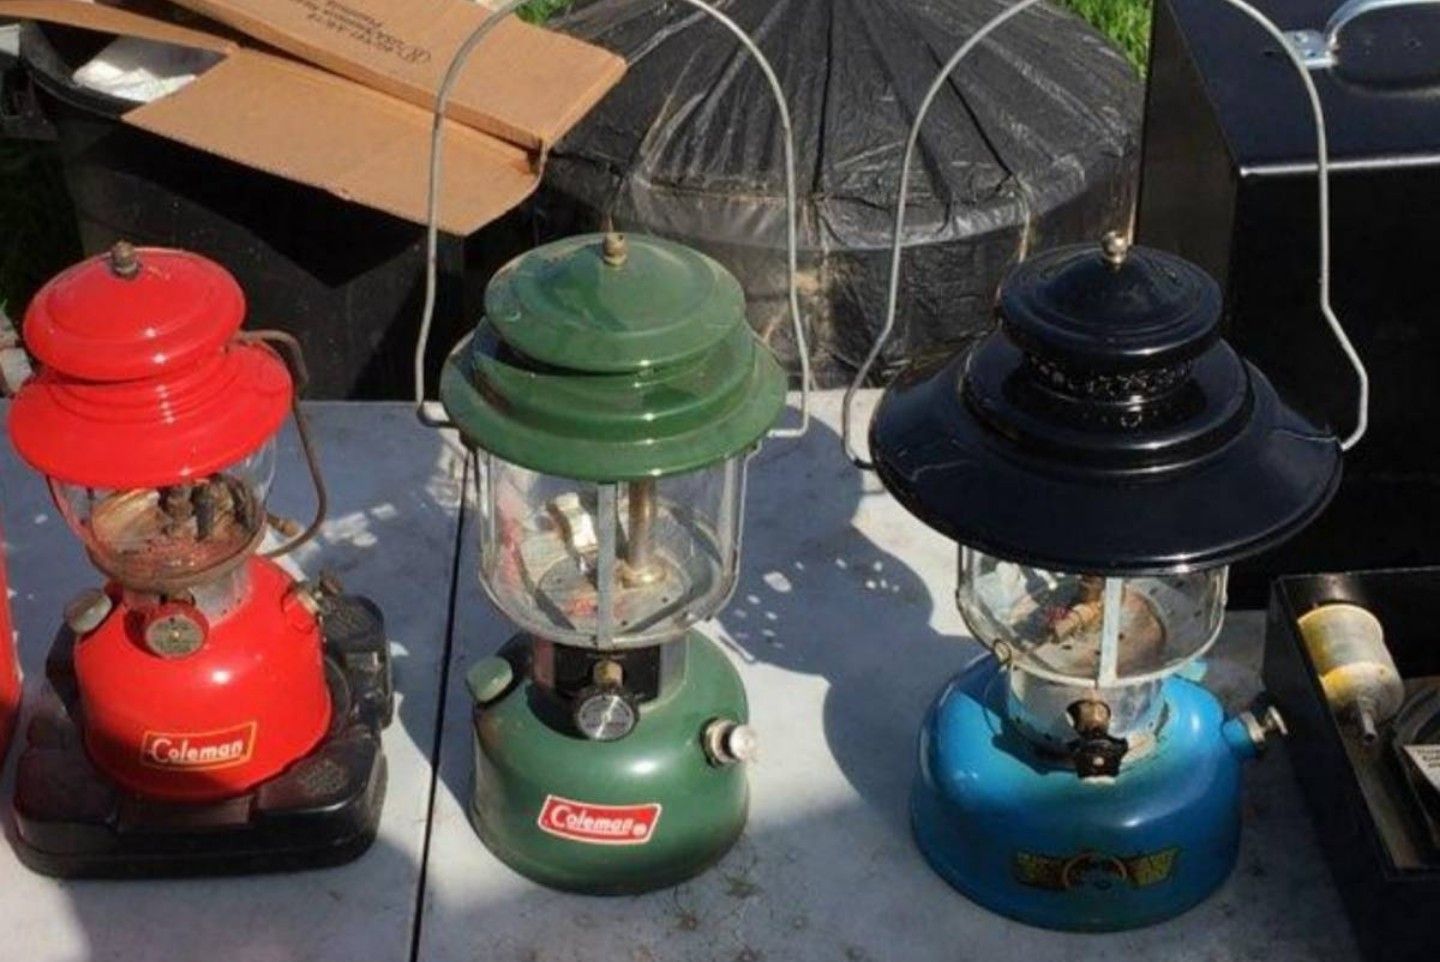 Looking for Sears and Coleman Lanterns